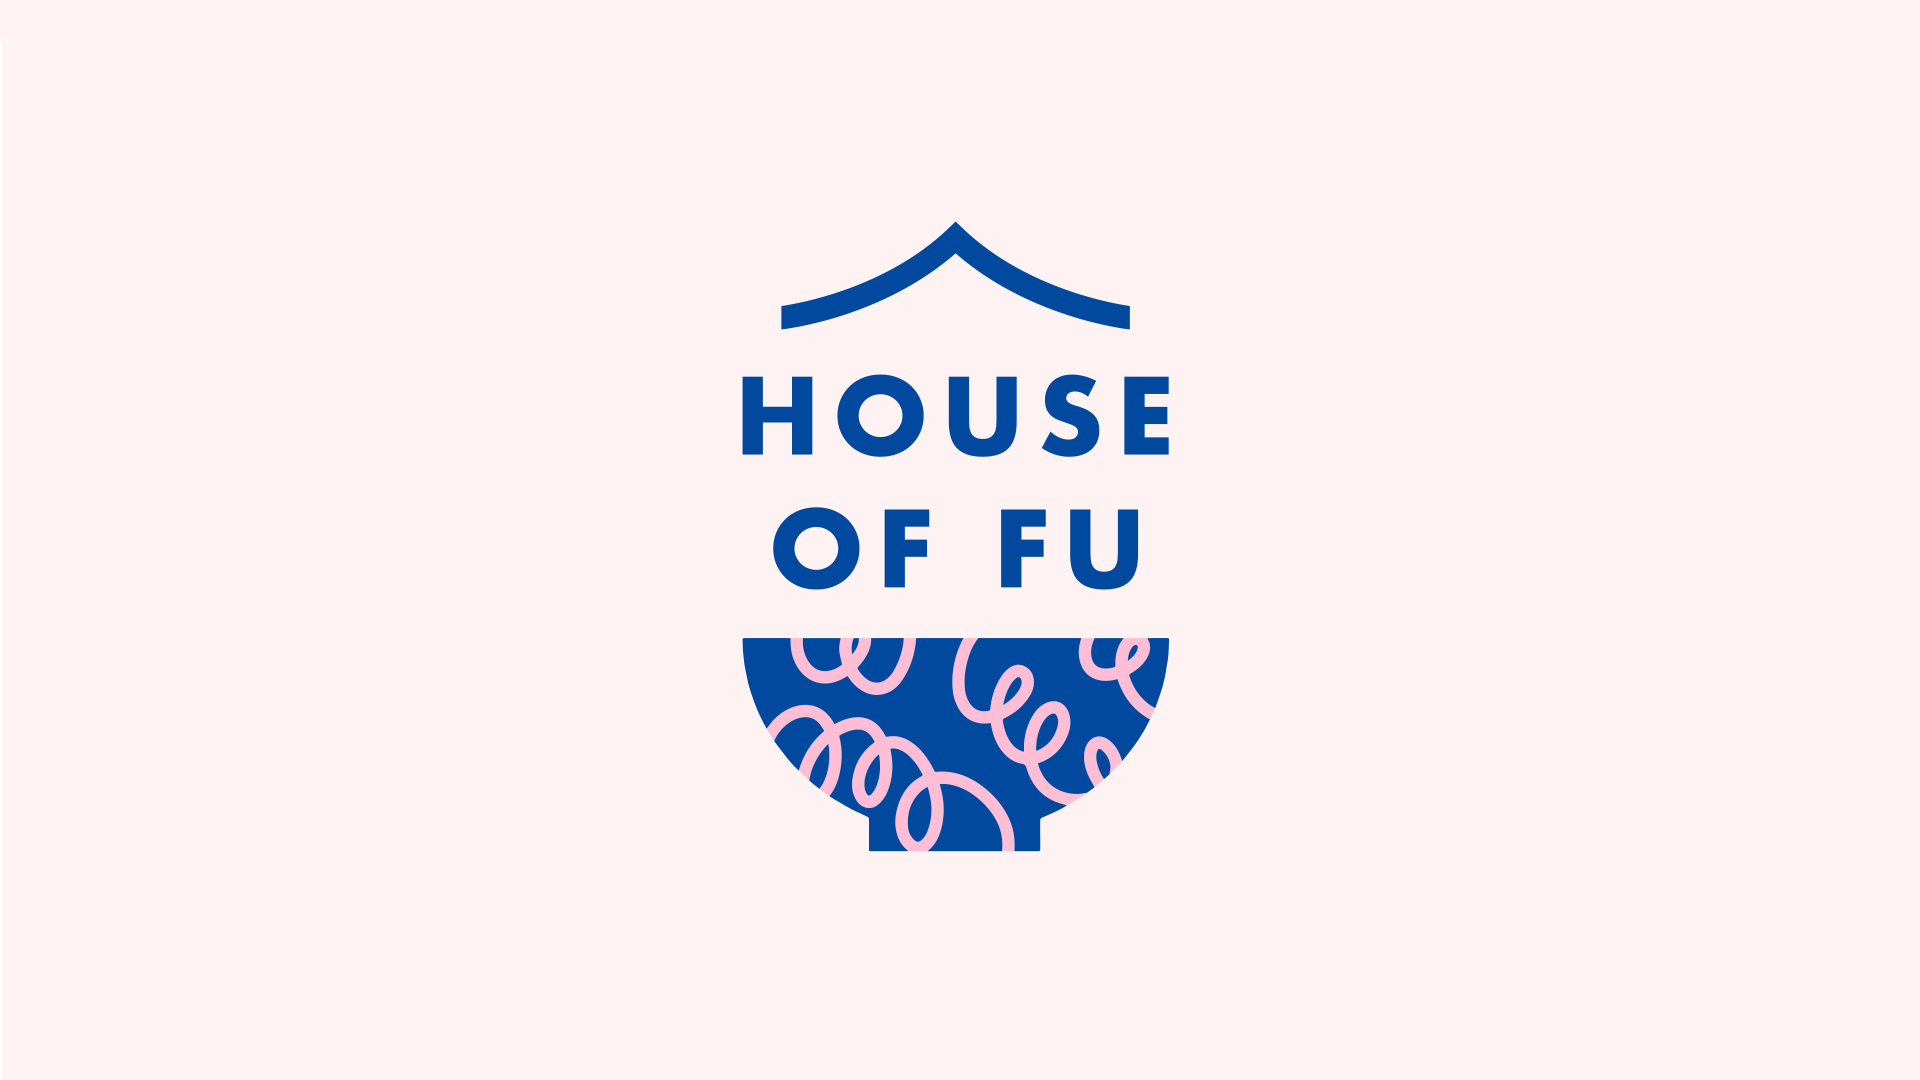 House of Fu Ramen Bar Branding Created by Turtle and Hare